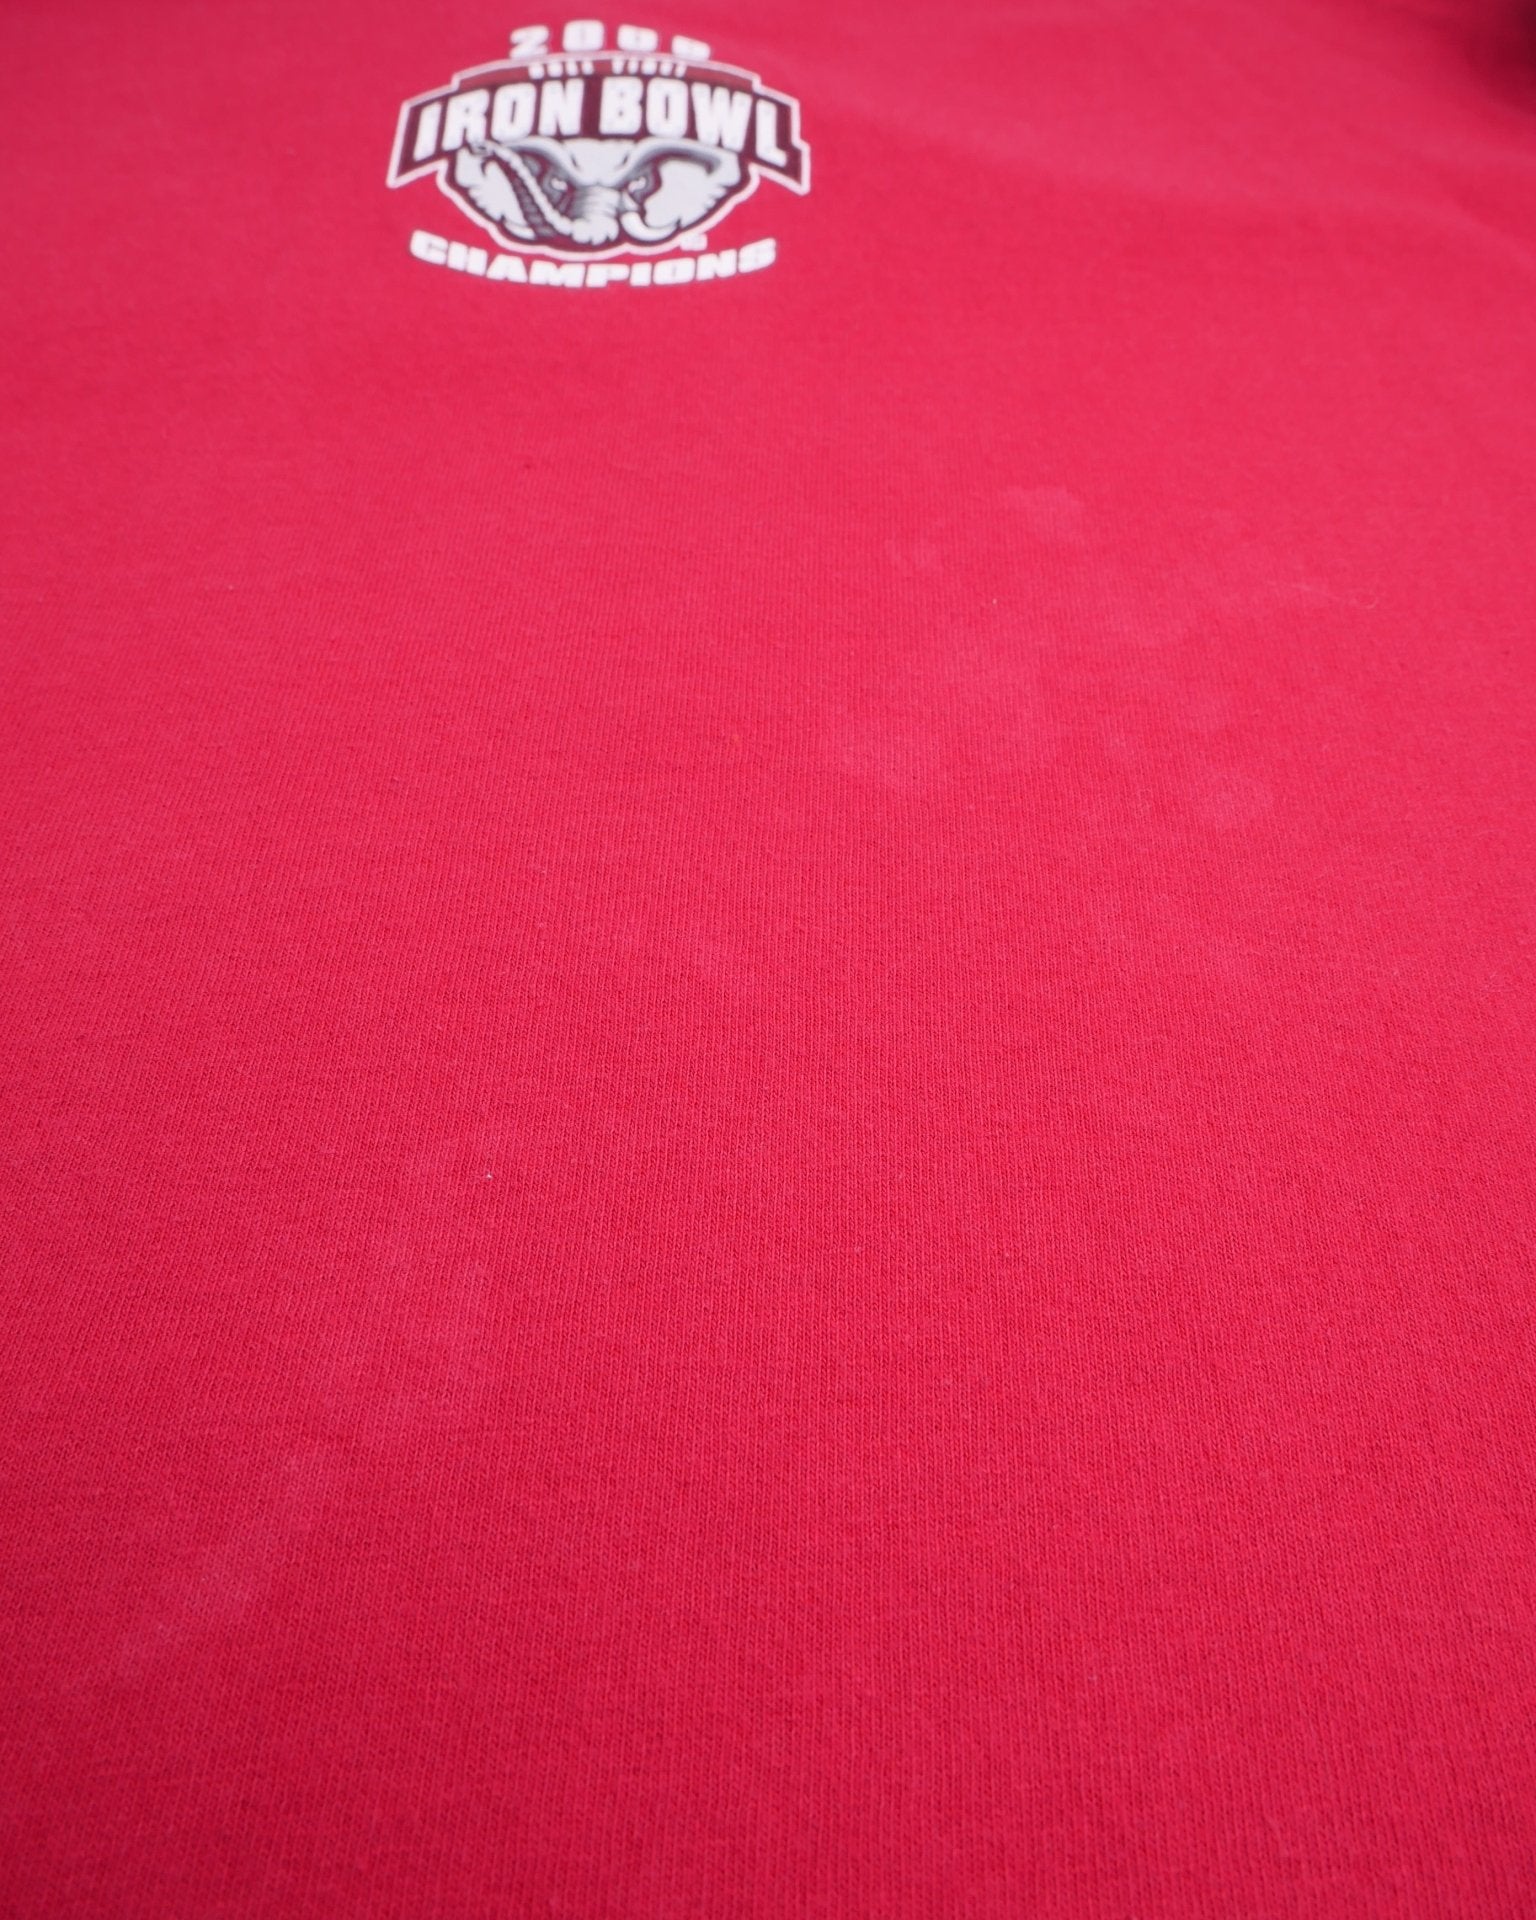 Delta Iron Bowl 2009 Champions printed Graphic red Shirt - Peeces